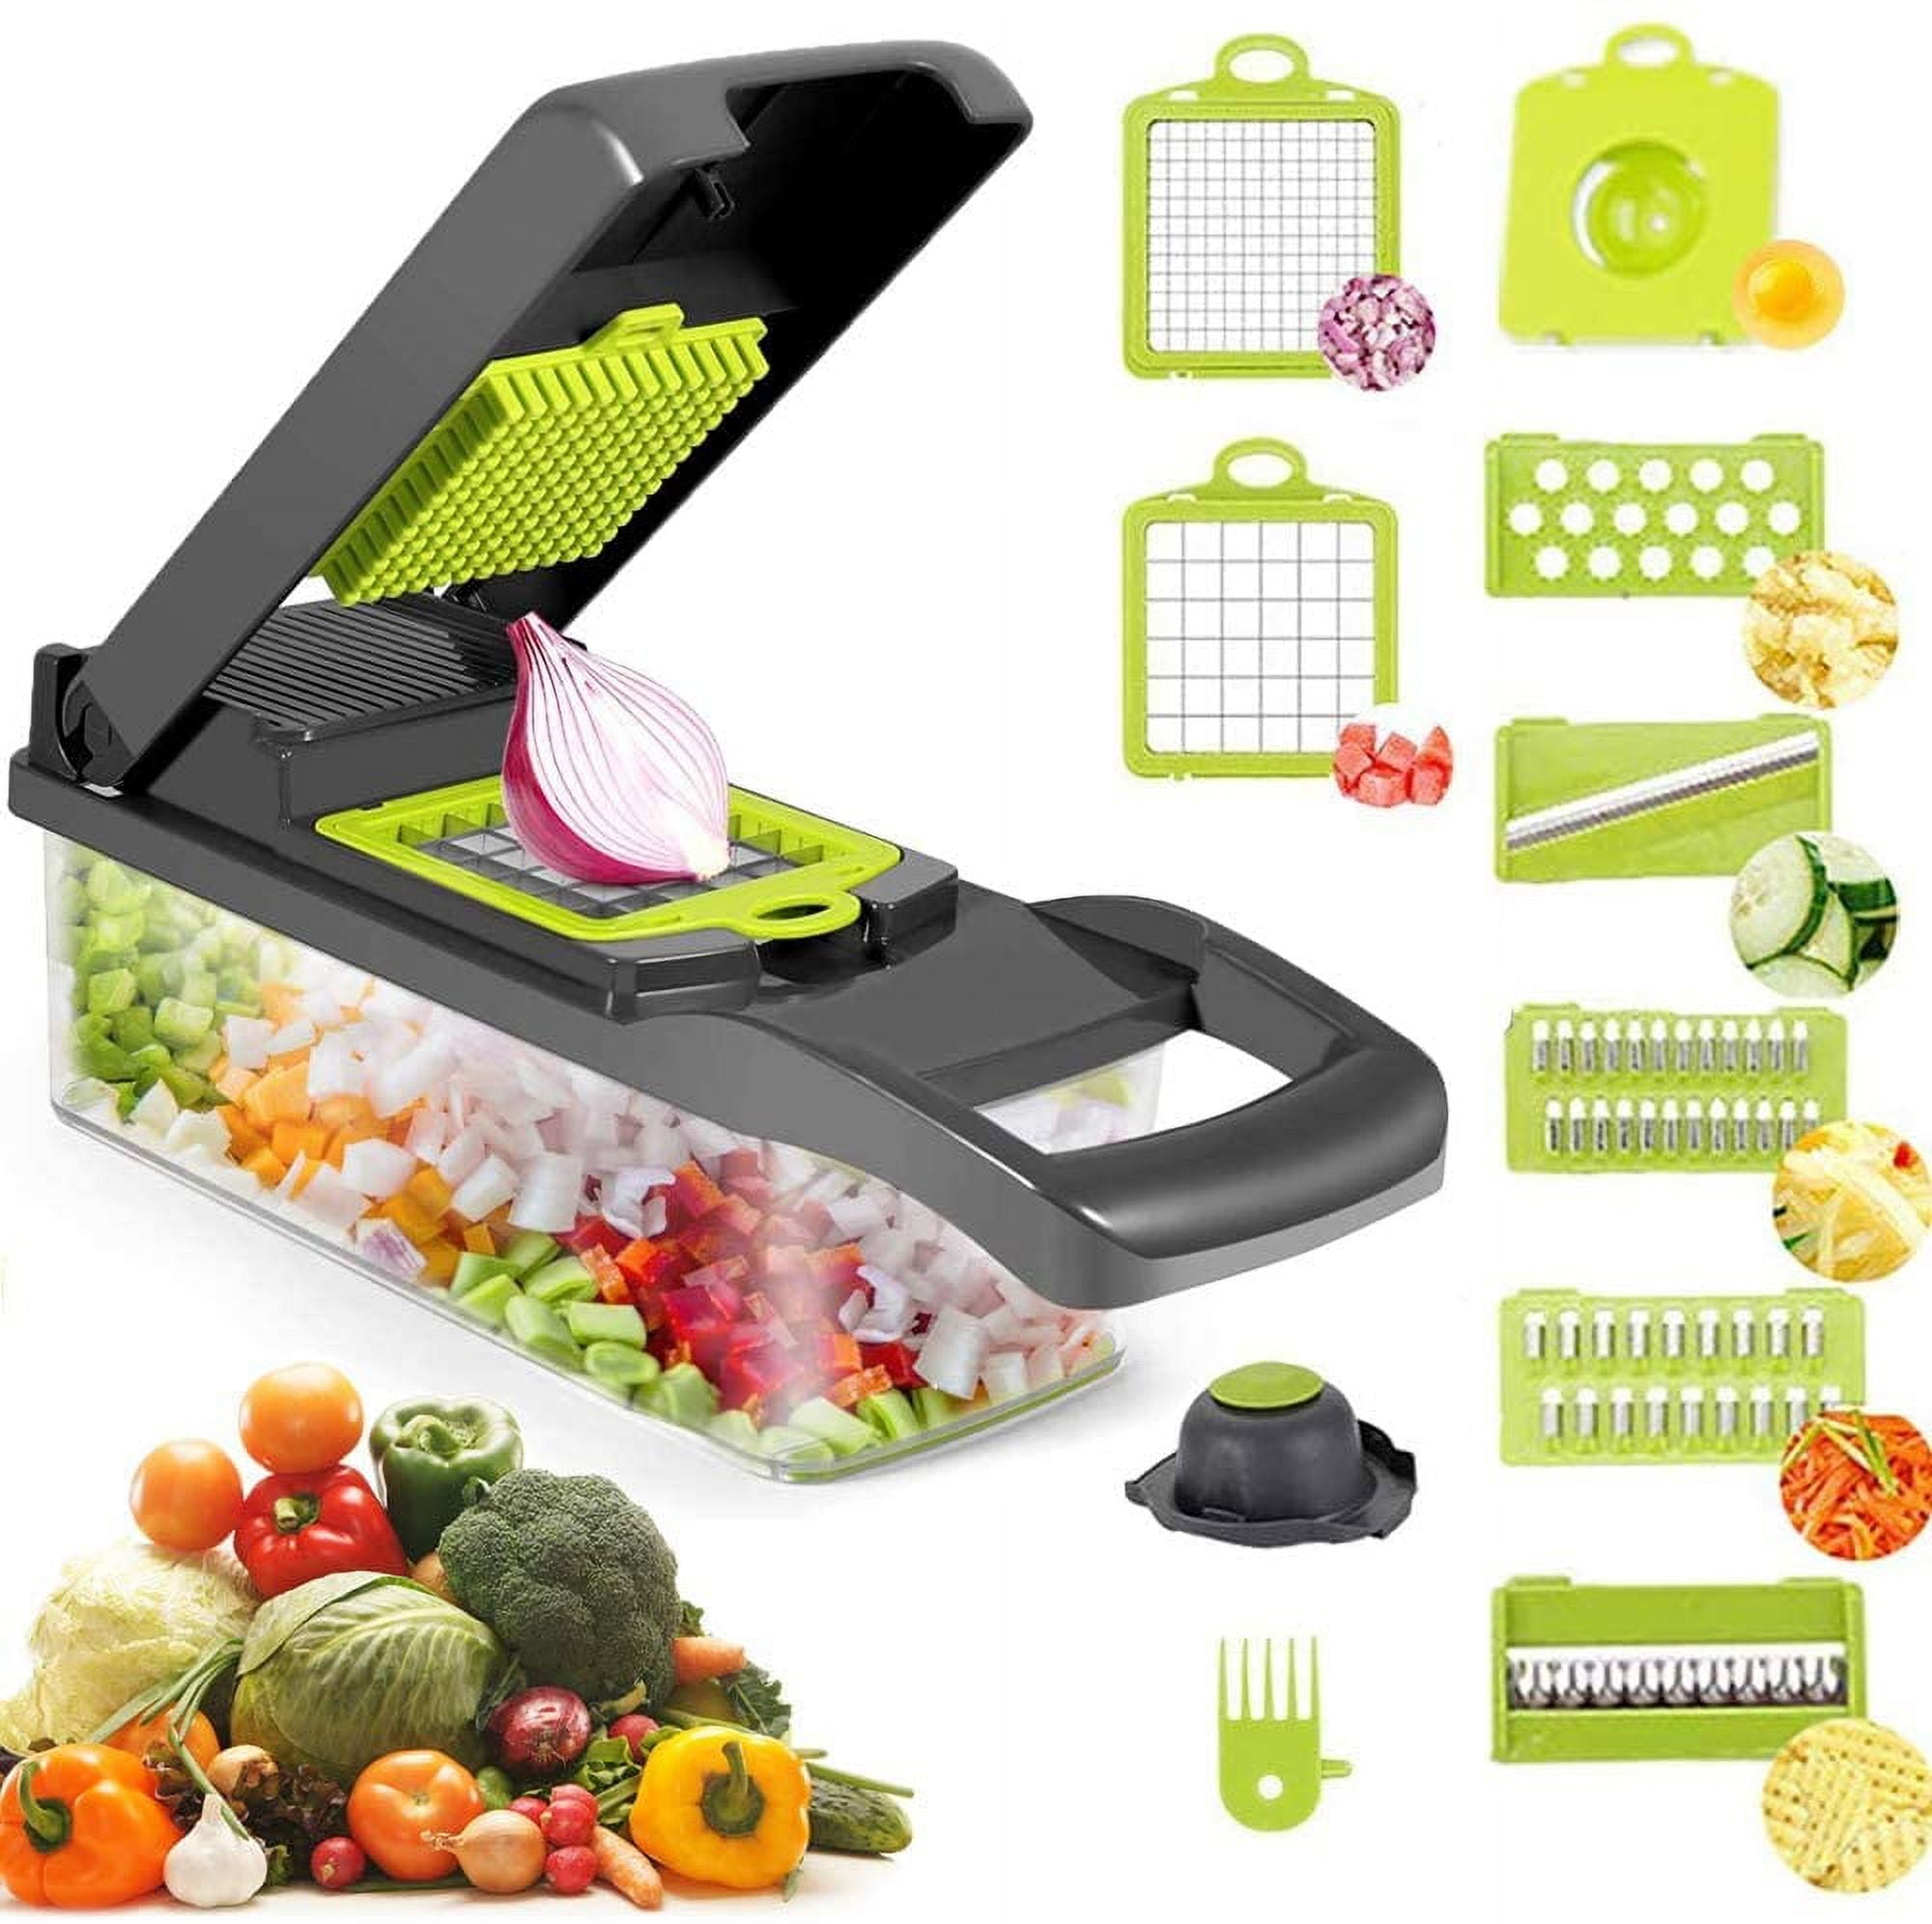 Cheer Collection Vegetable Chopper with Container - 10 in 1 Food Slicer Vegetable Cutter with 8 Blades